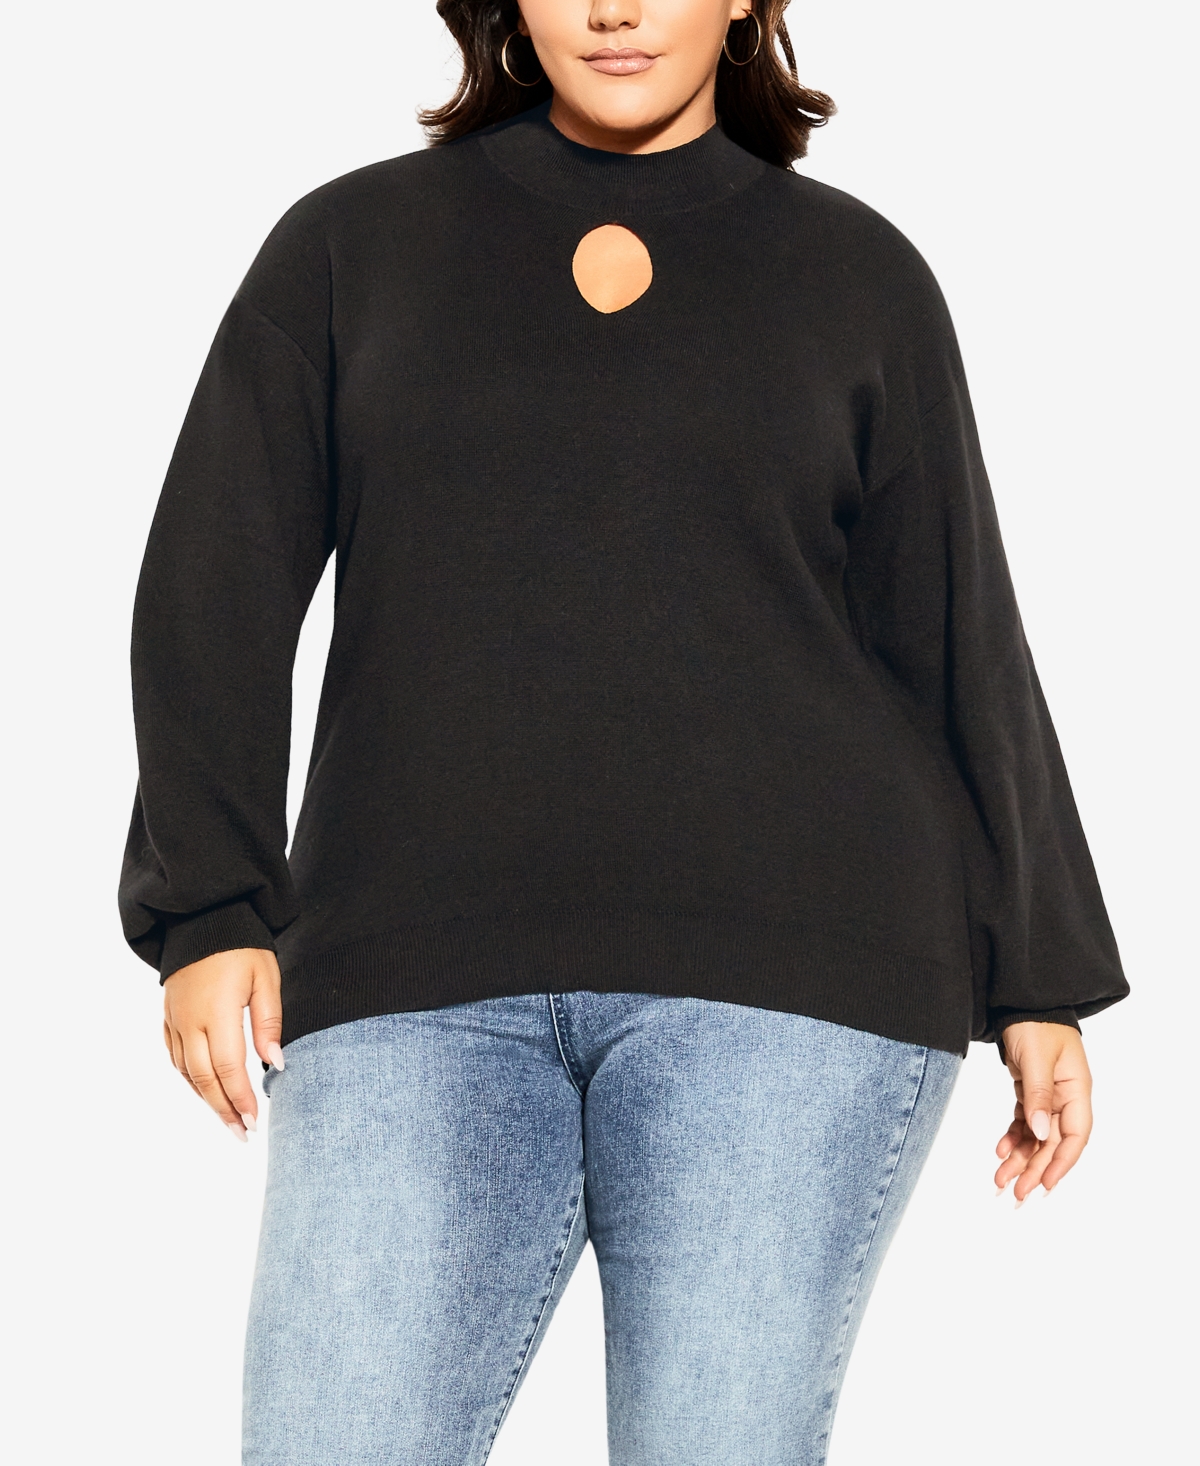 CITY CHIC TRENDY PLUS SIZE EVELYN KEYHOLE SWEATER